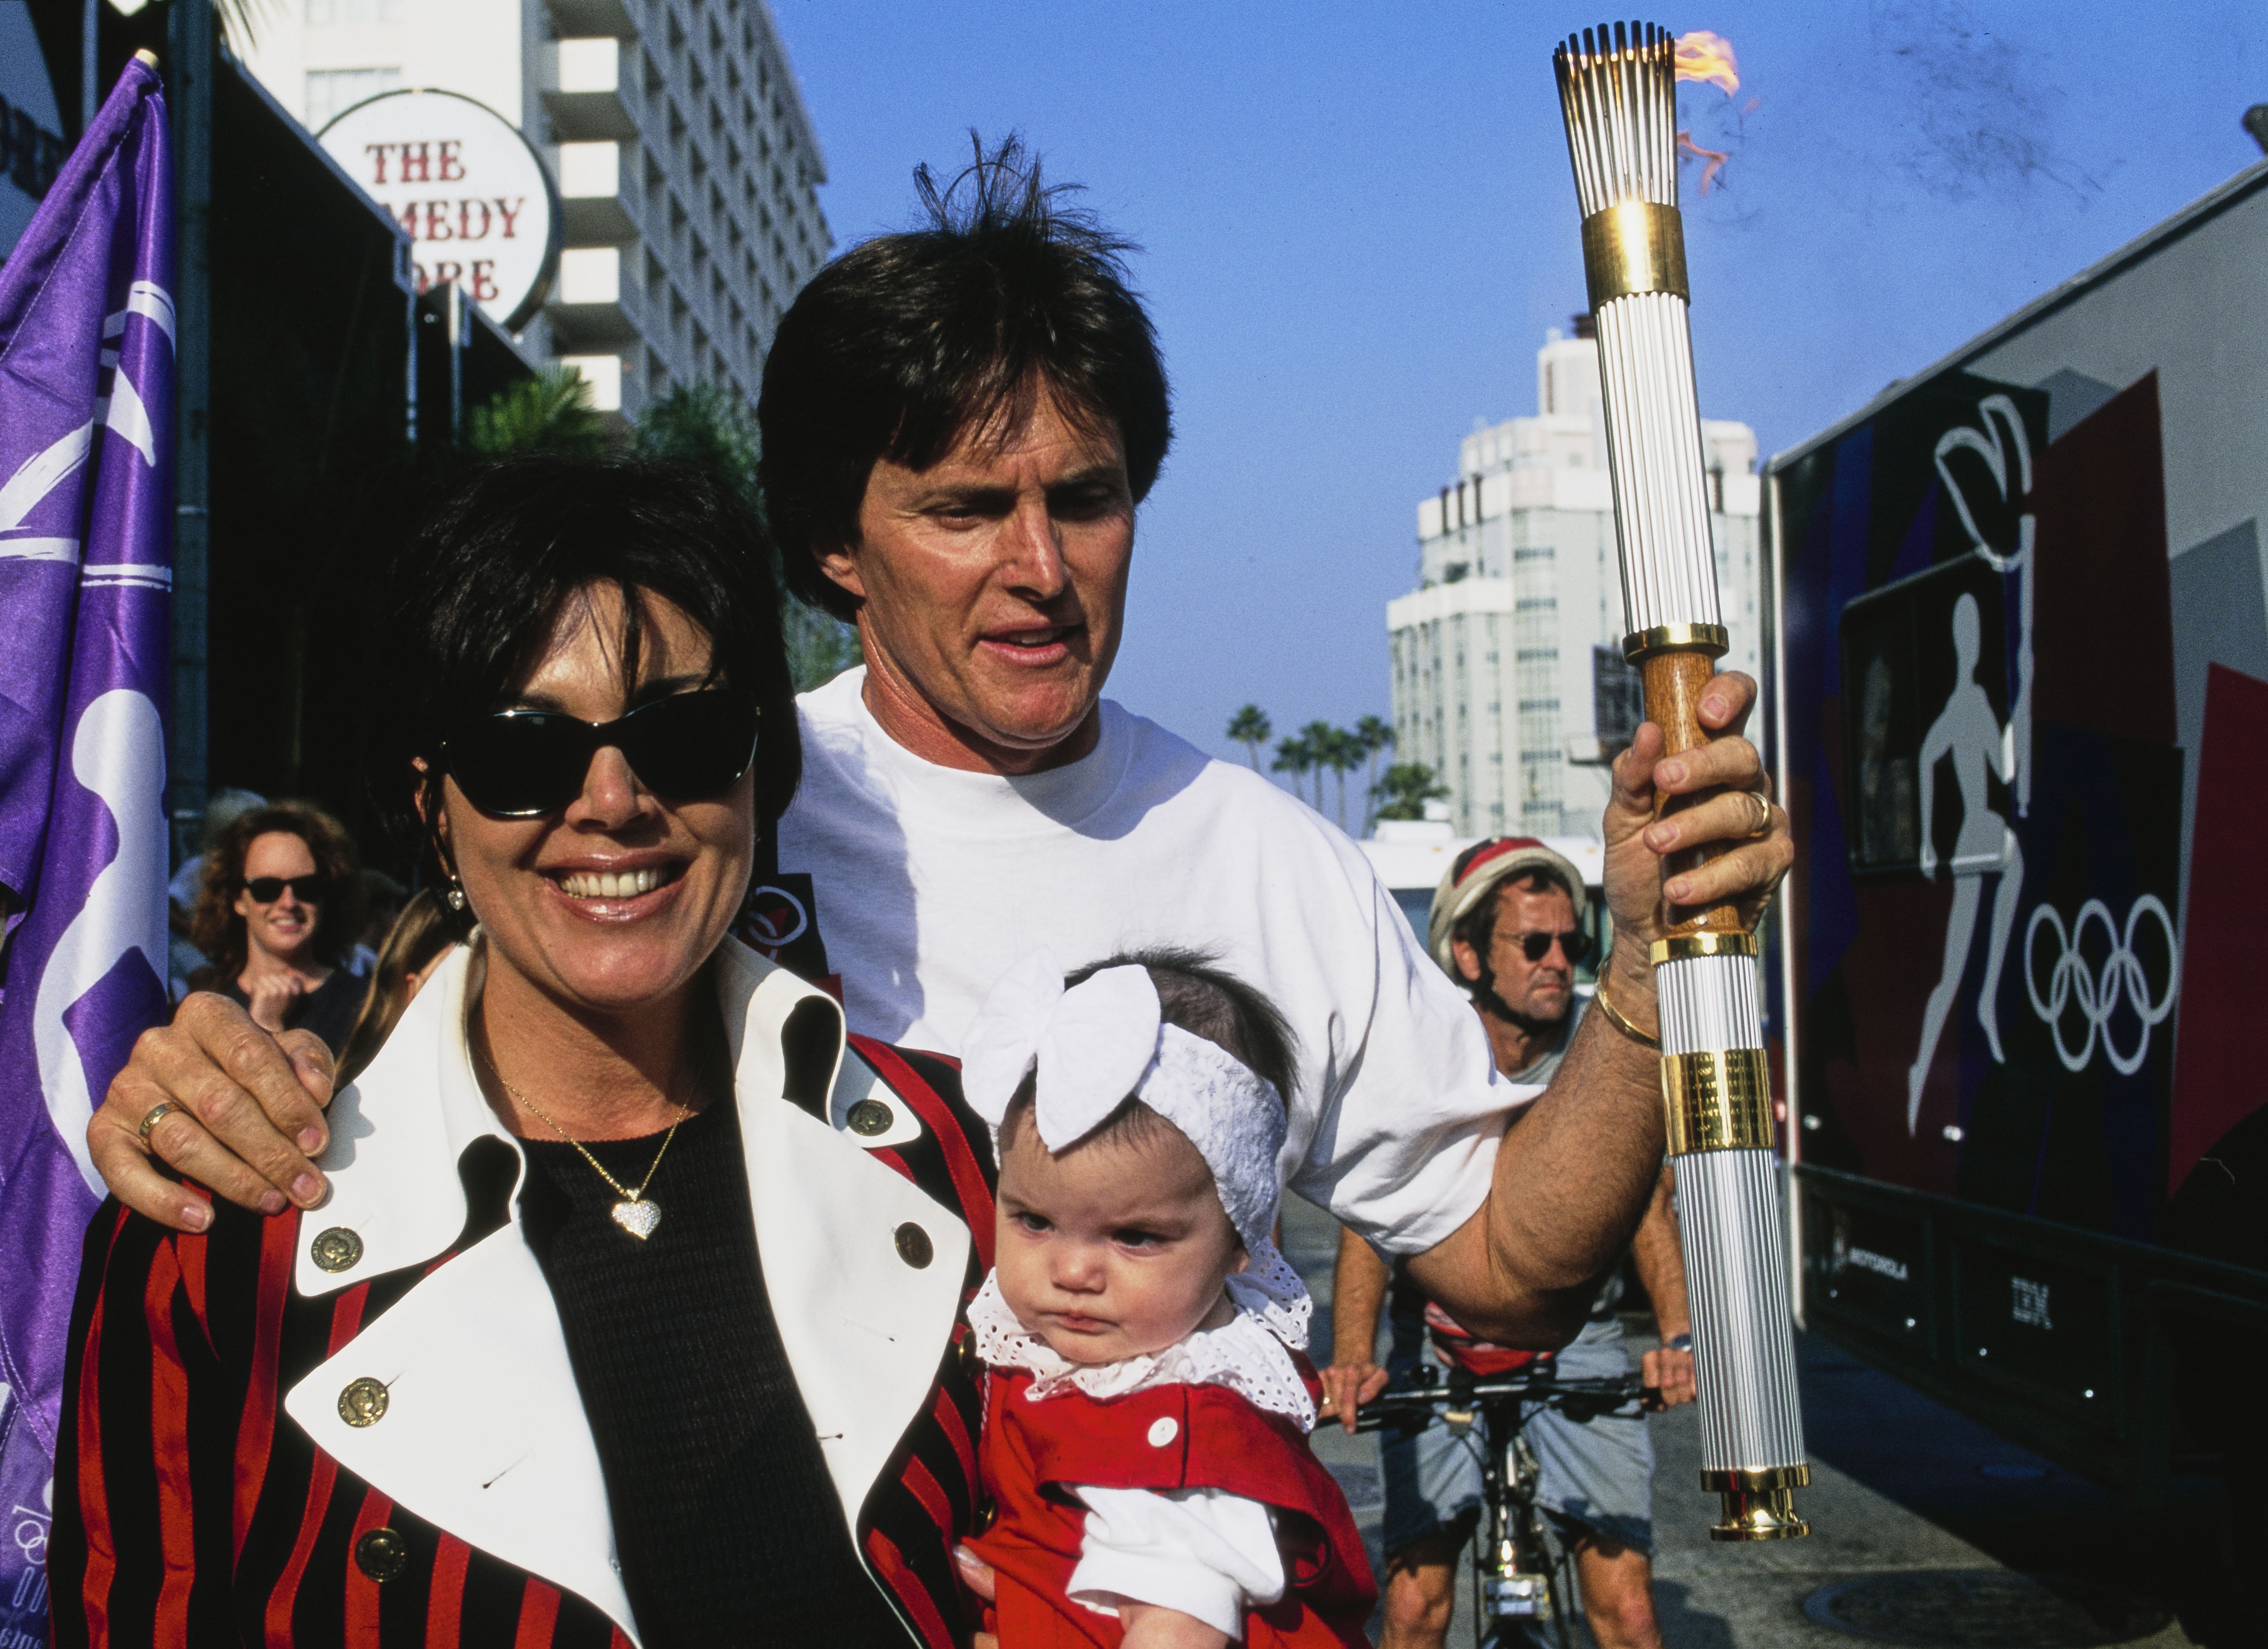 Bruce Jenner with his then-wife Kris Kardashian and daughter Kendall Jenner during the torch relay for the XXVI Summer Olympic Games on April 17, 1996 in Los Angeles, California | Source: Getty Images